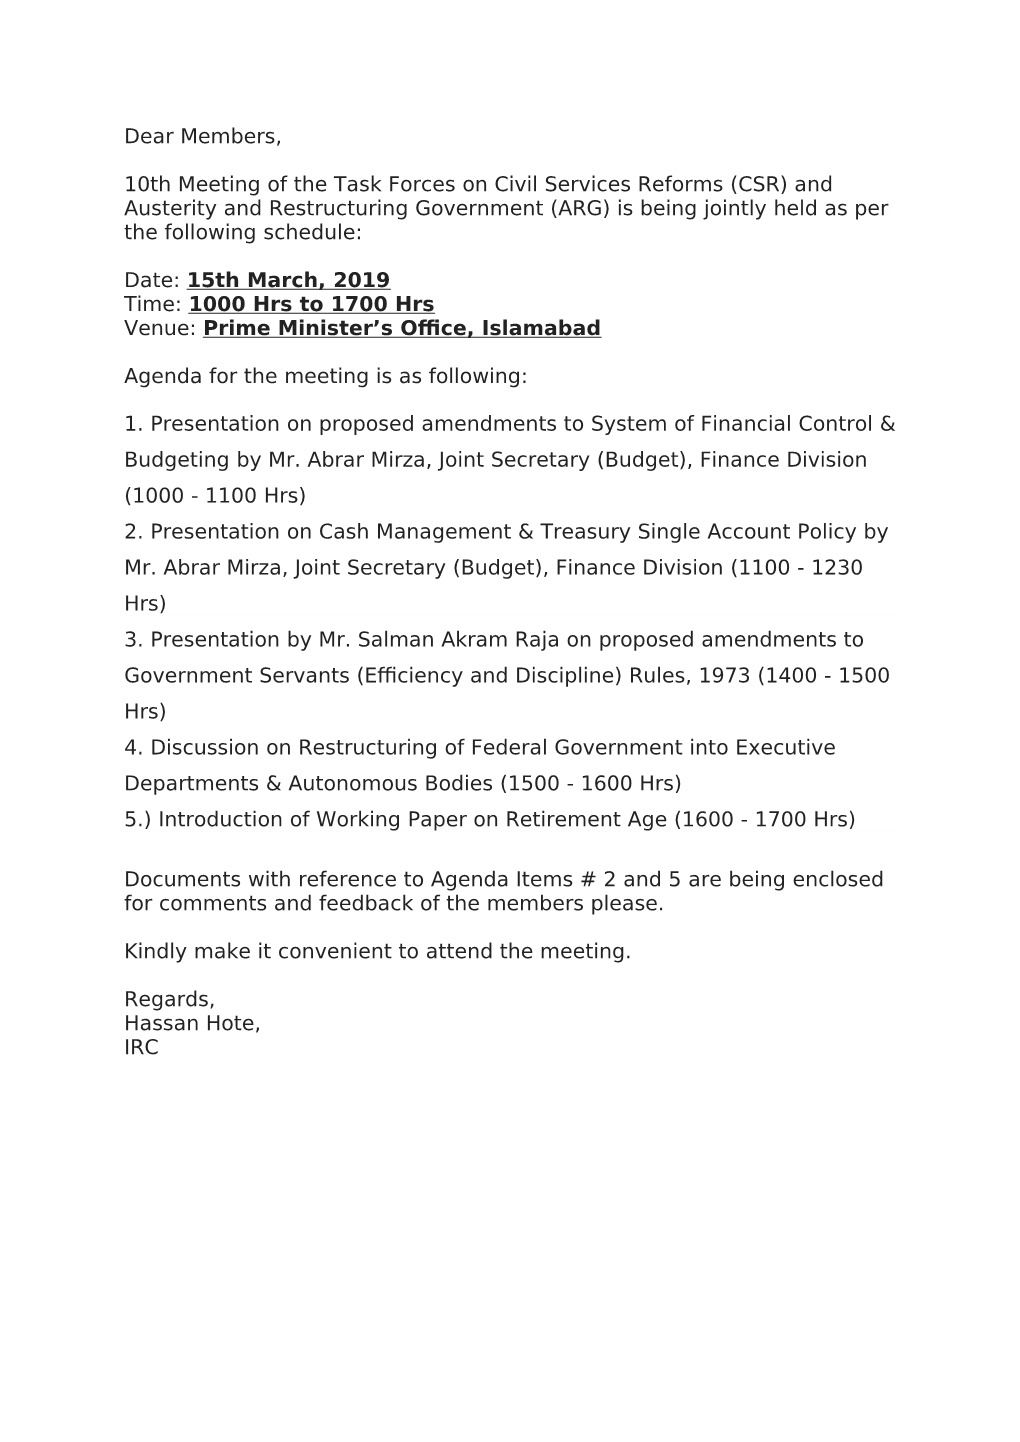 Dear Members, 10Th Meeting of the Task Forces on Civil Services